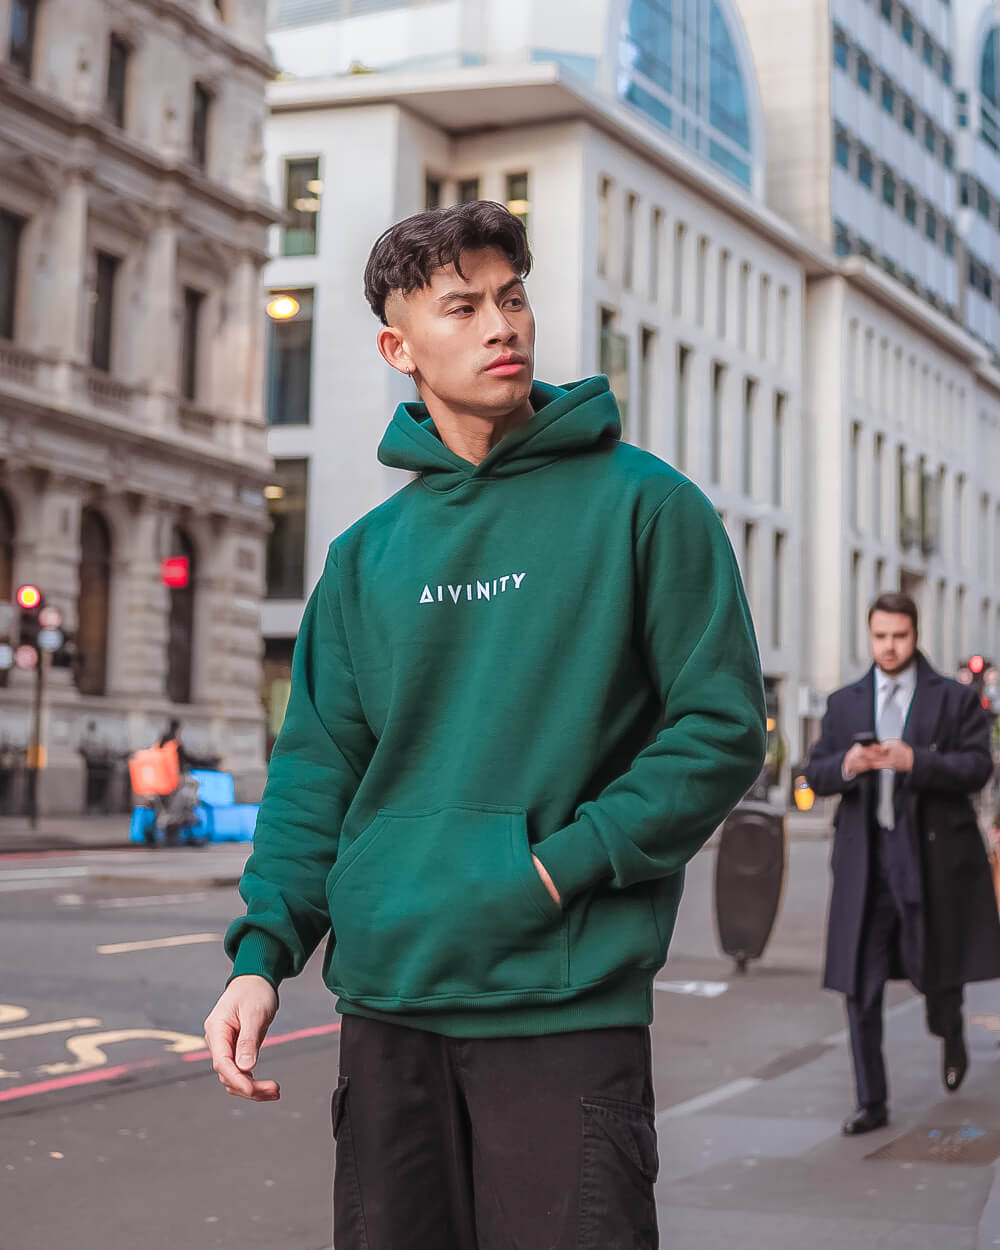 Dreams Unleashed Oversized Hoodie - Forest Green